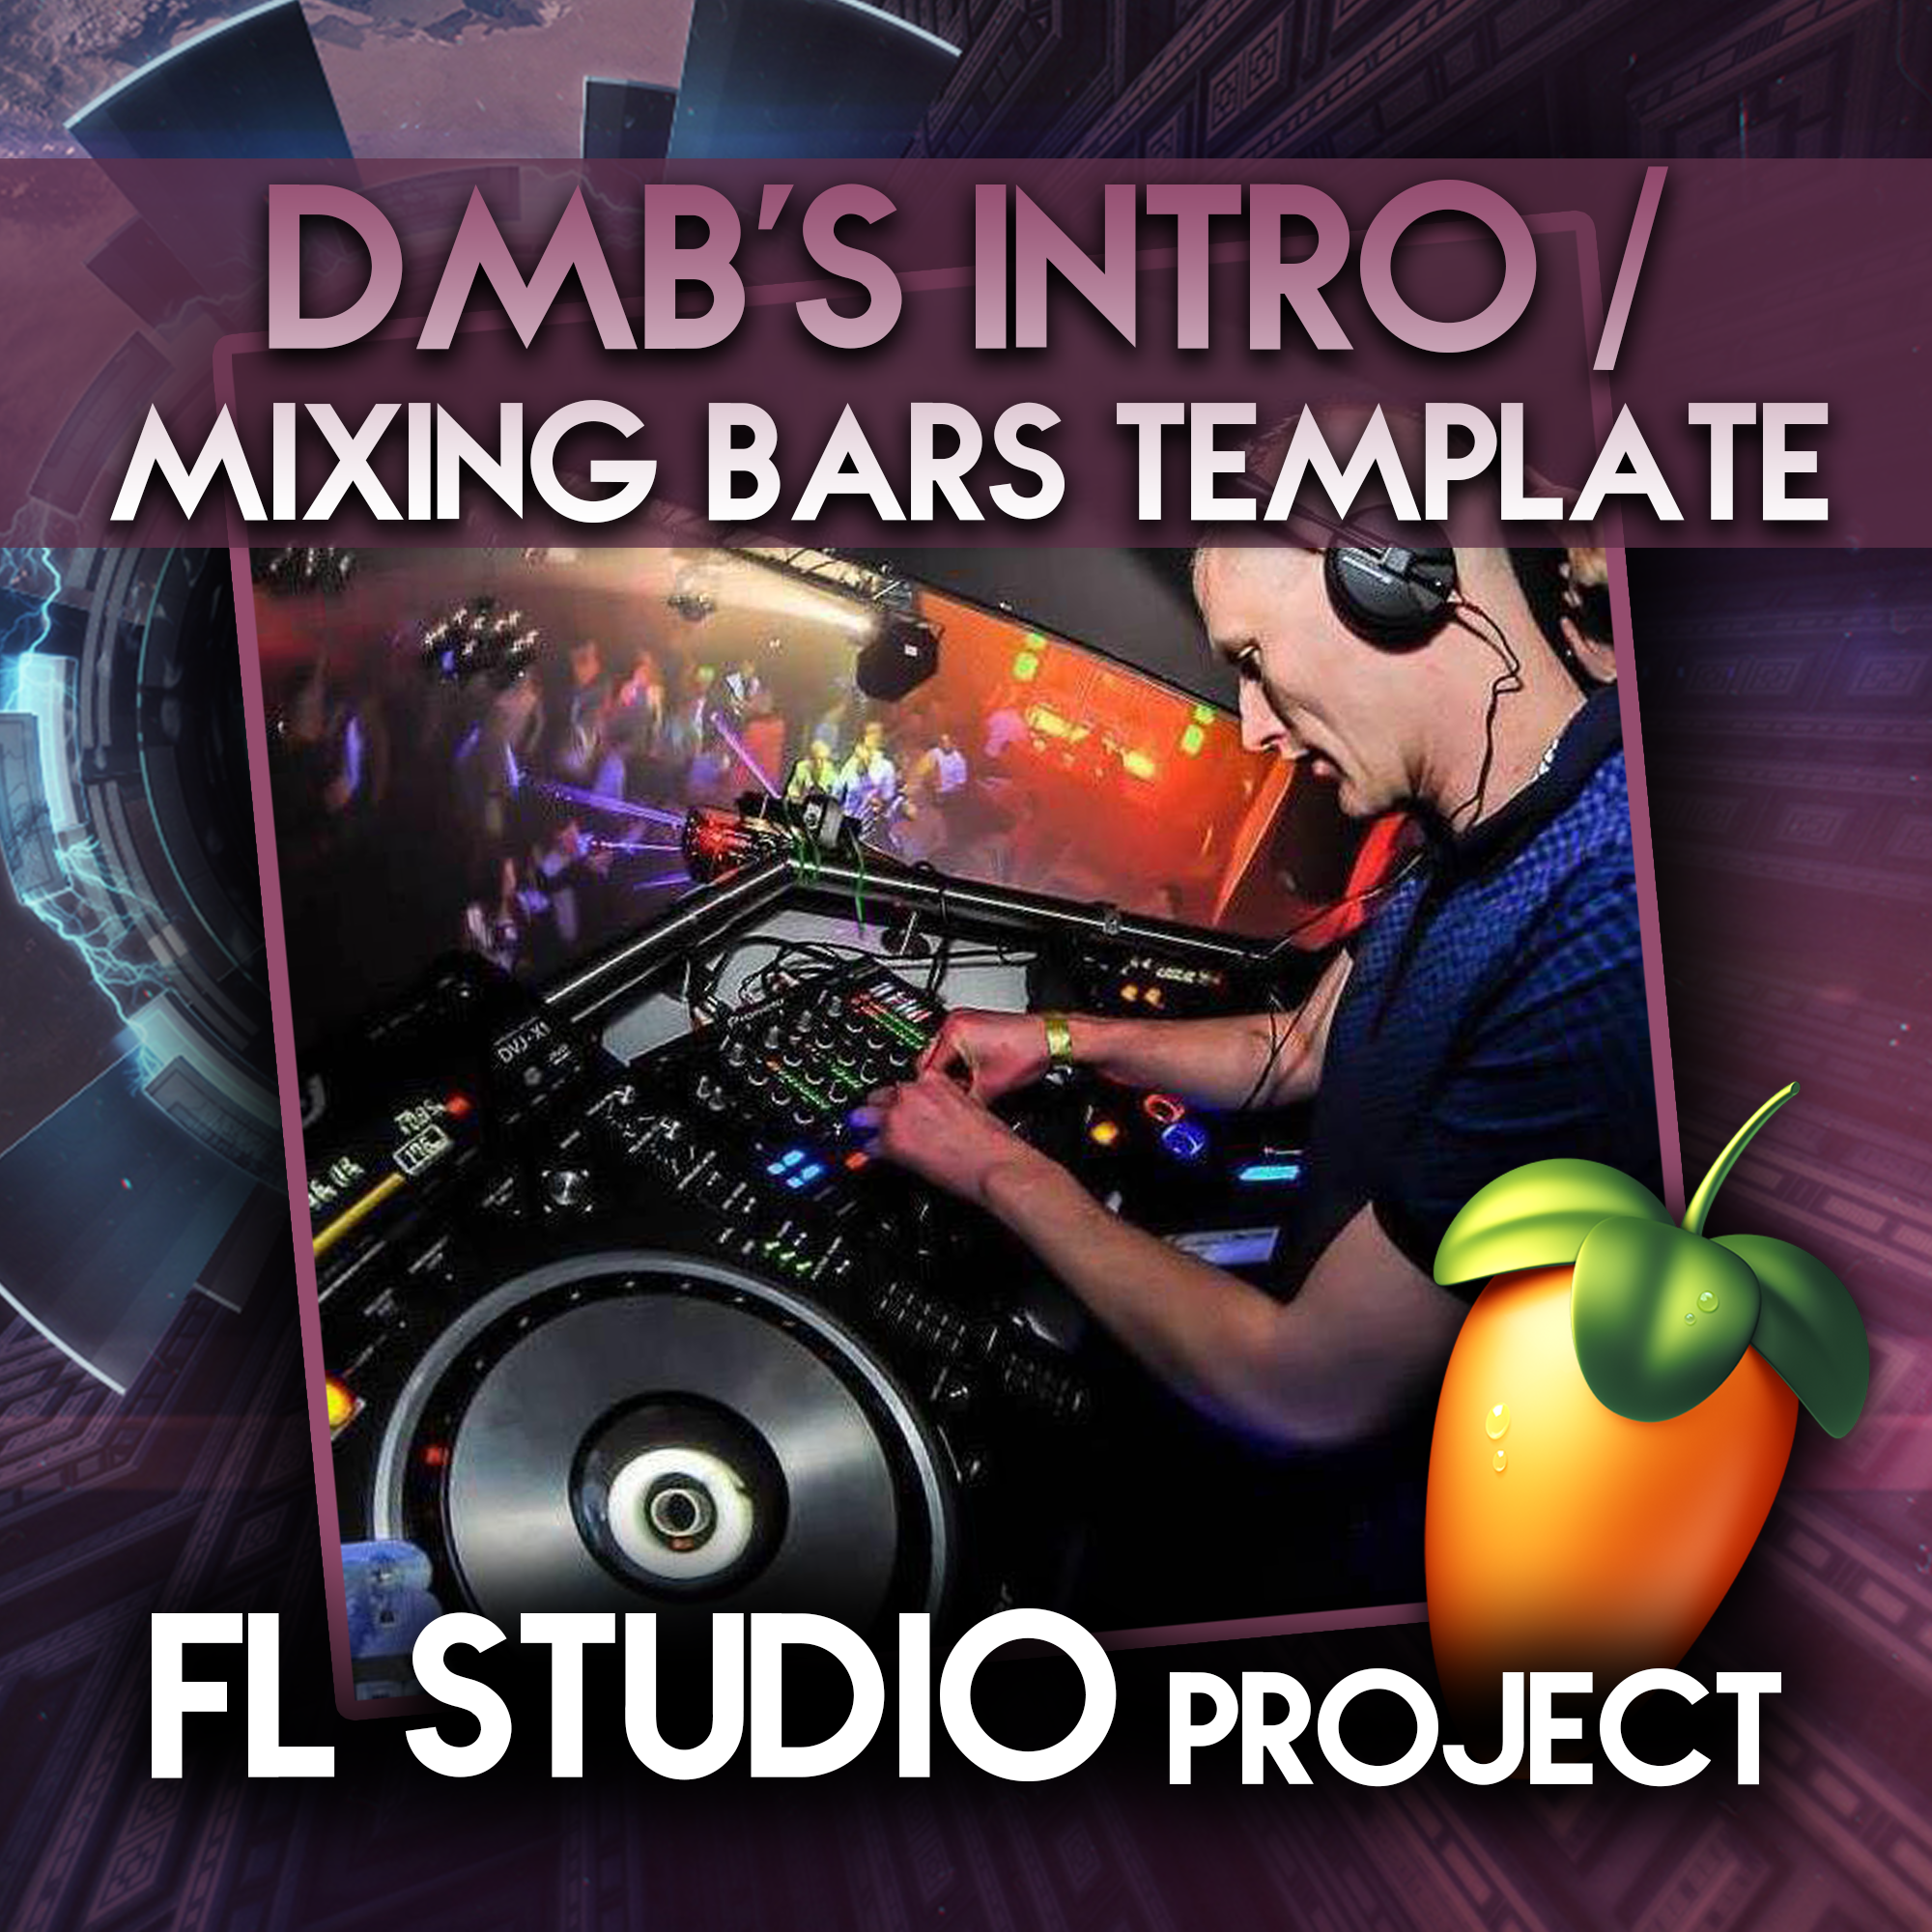 DMB's Intro / Mixing Bars Template (FL Studio Project) - Rewired Records